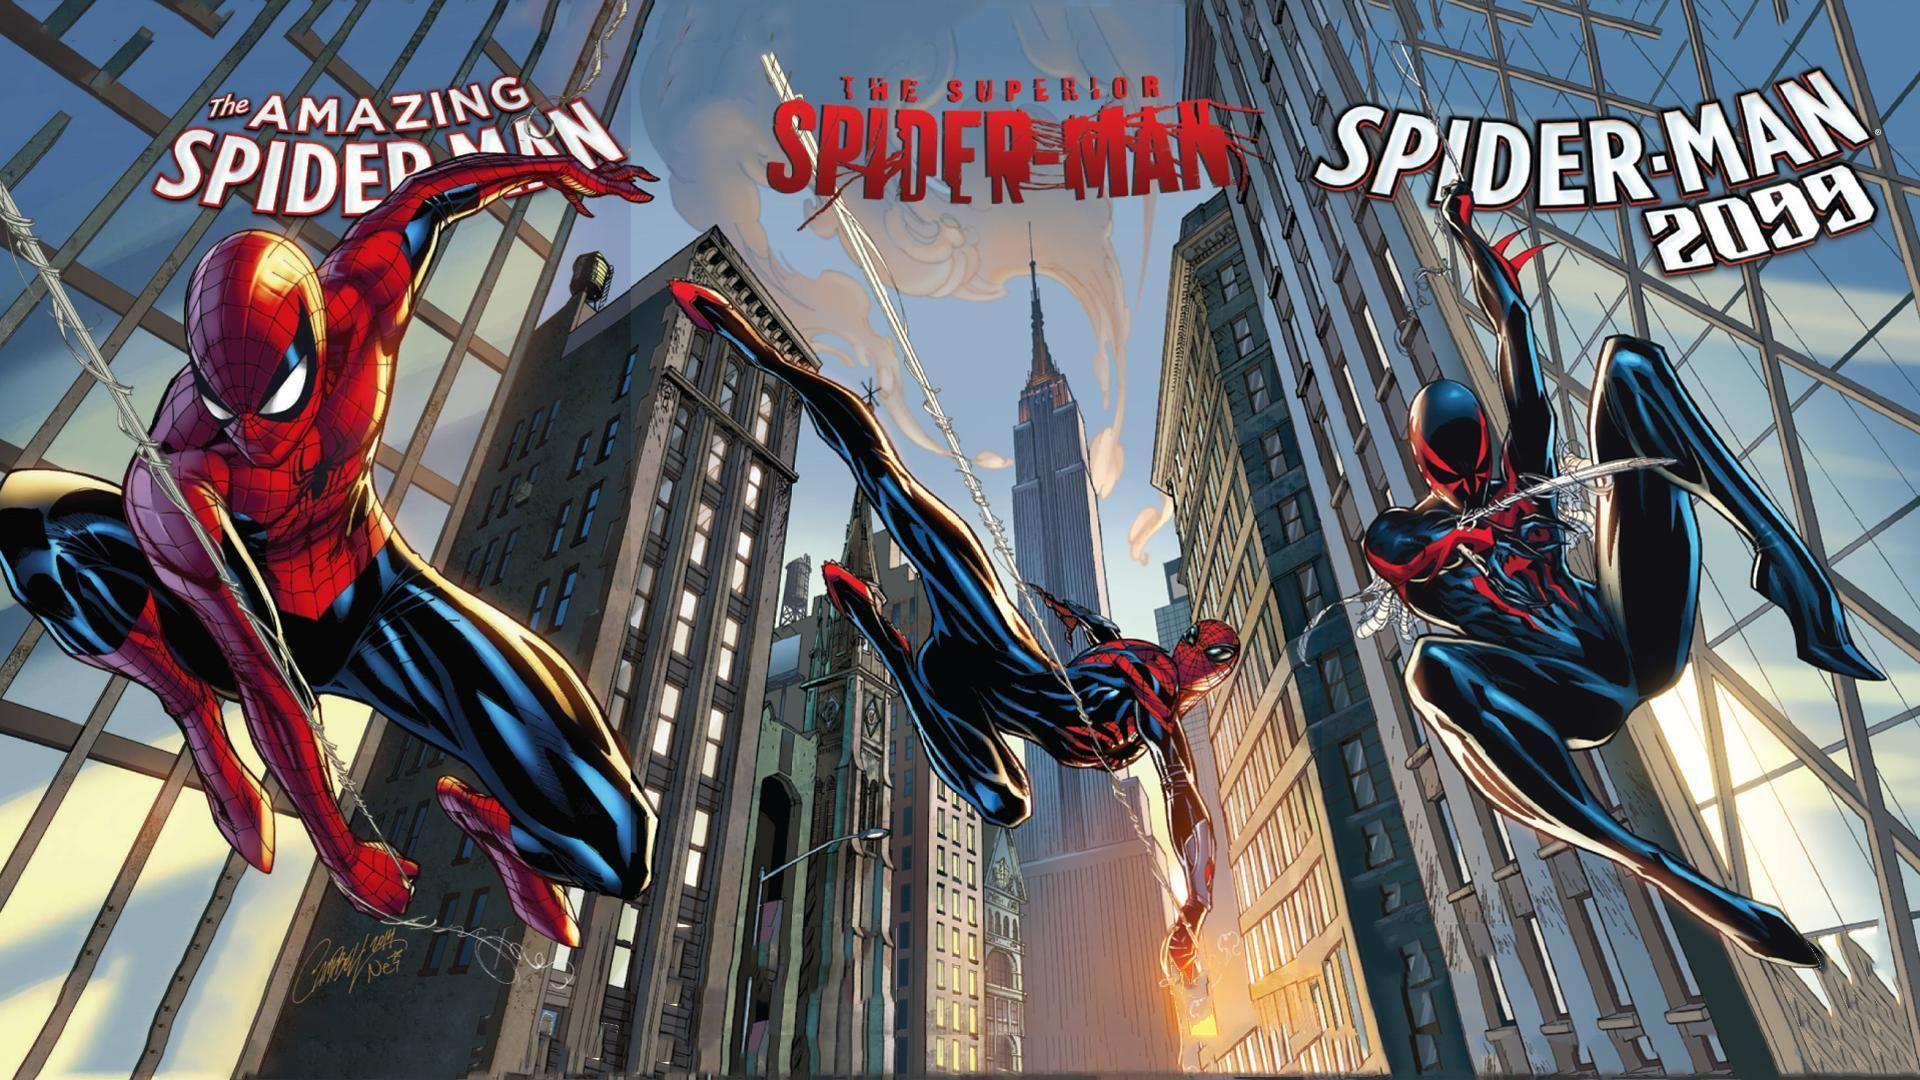 Amazing Superior 2099 Spider Men (Text Removed) [1920x1080] Need